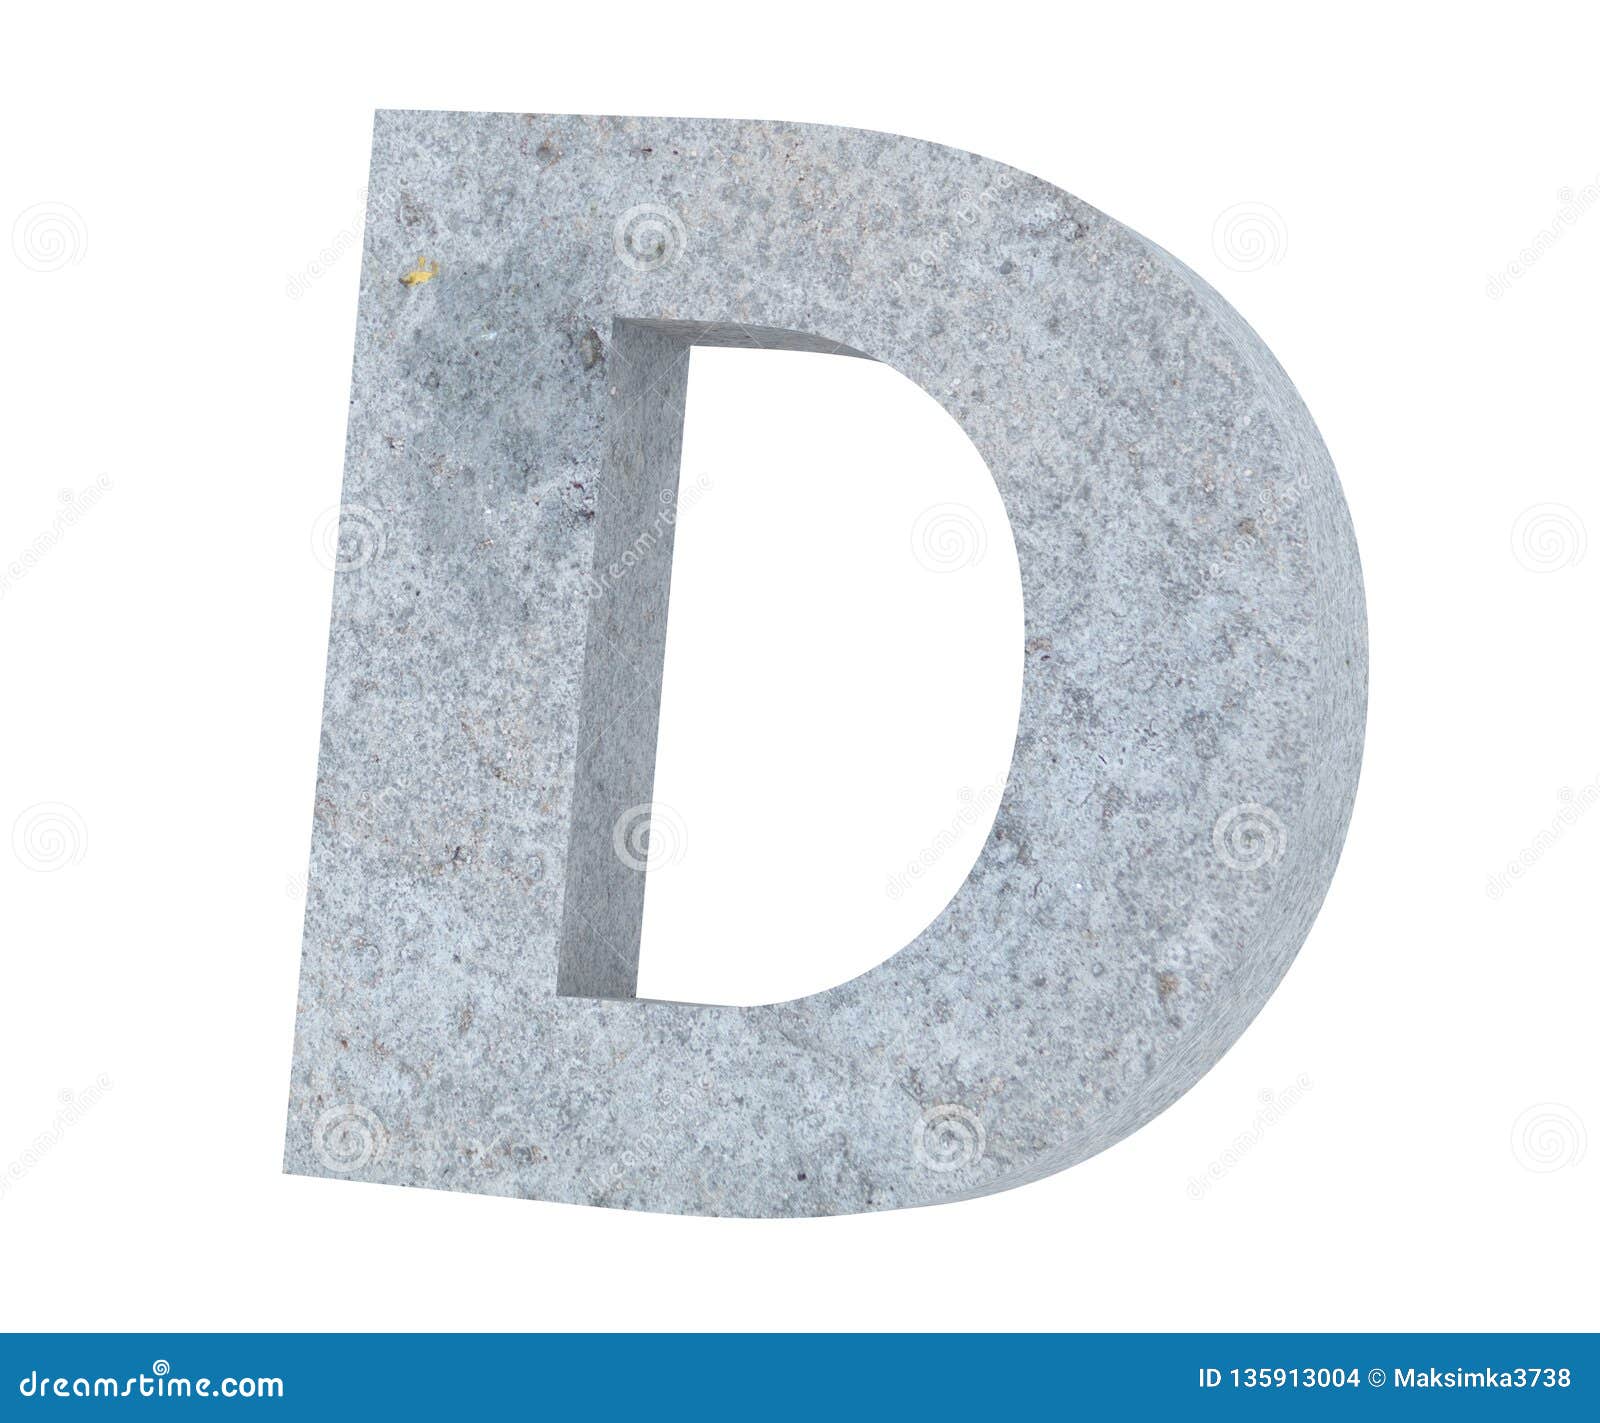 Concrete Capital Letter - D Isolated on White Background. 3D Render ...